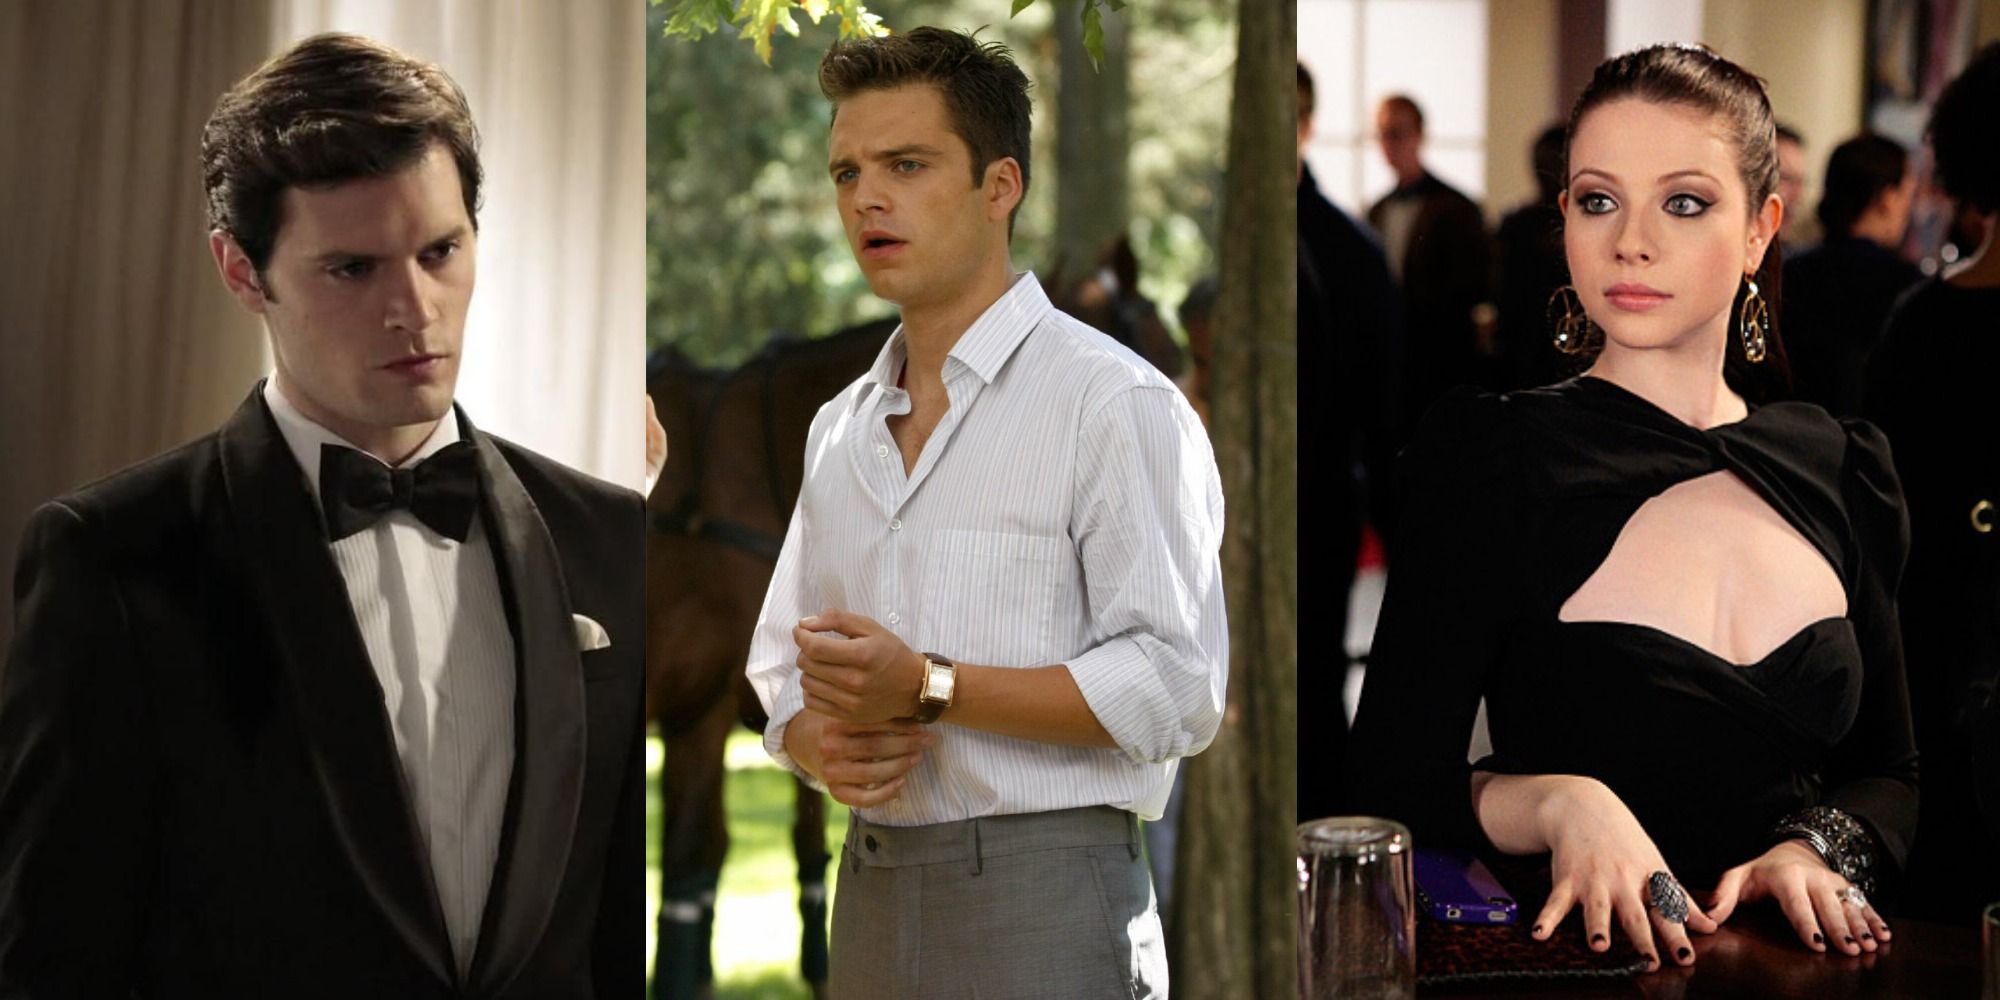 Gossip Girl: All The Villains Of The Show, Ranked